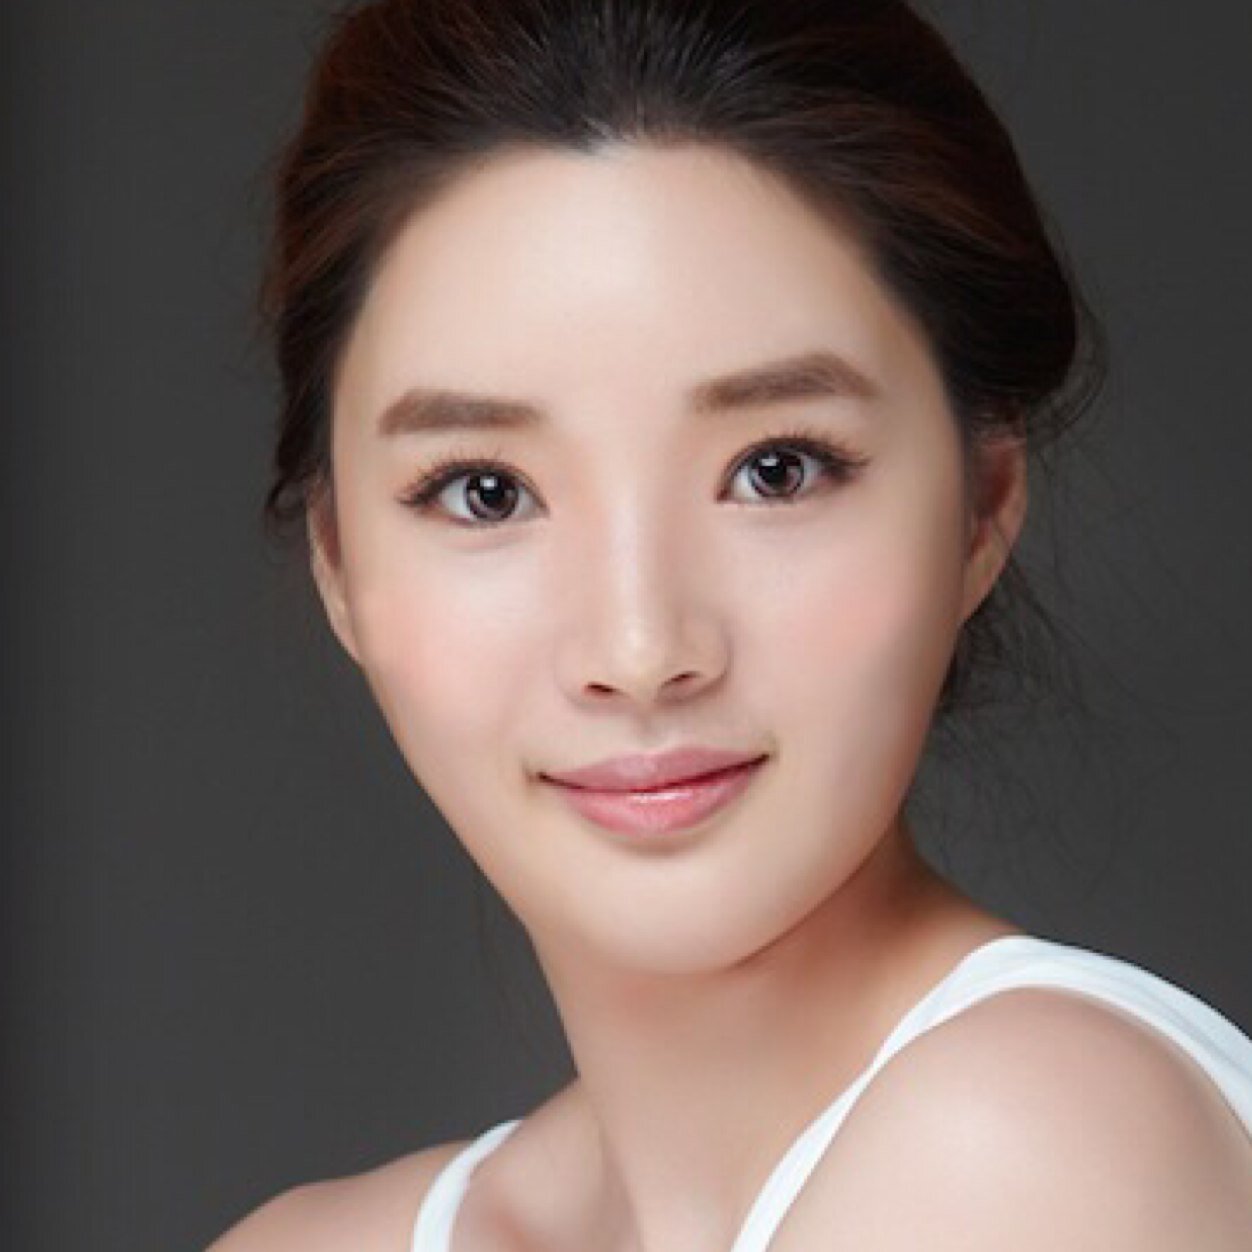 Get the best look from every angle. Rewind 10 years of face age. Only with cosmetic medical tourism to Asia's best hospital in Korea. consultation.vmm@gmail.com